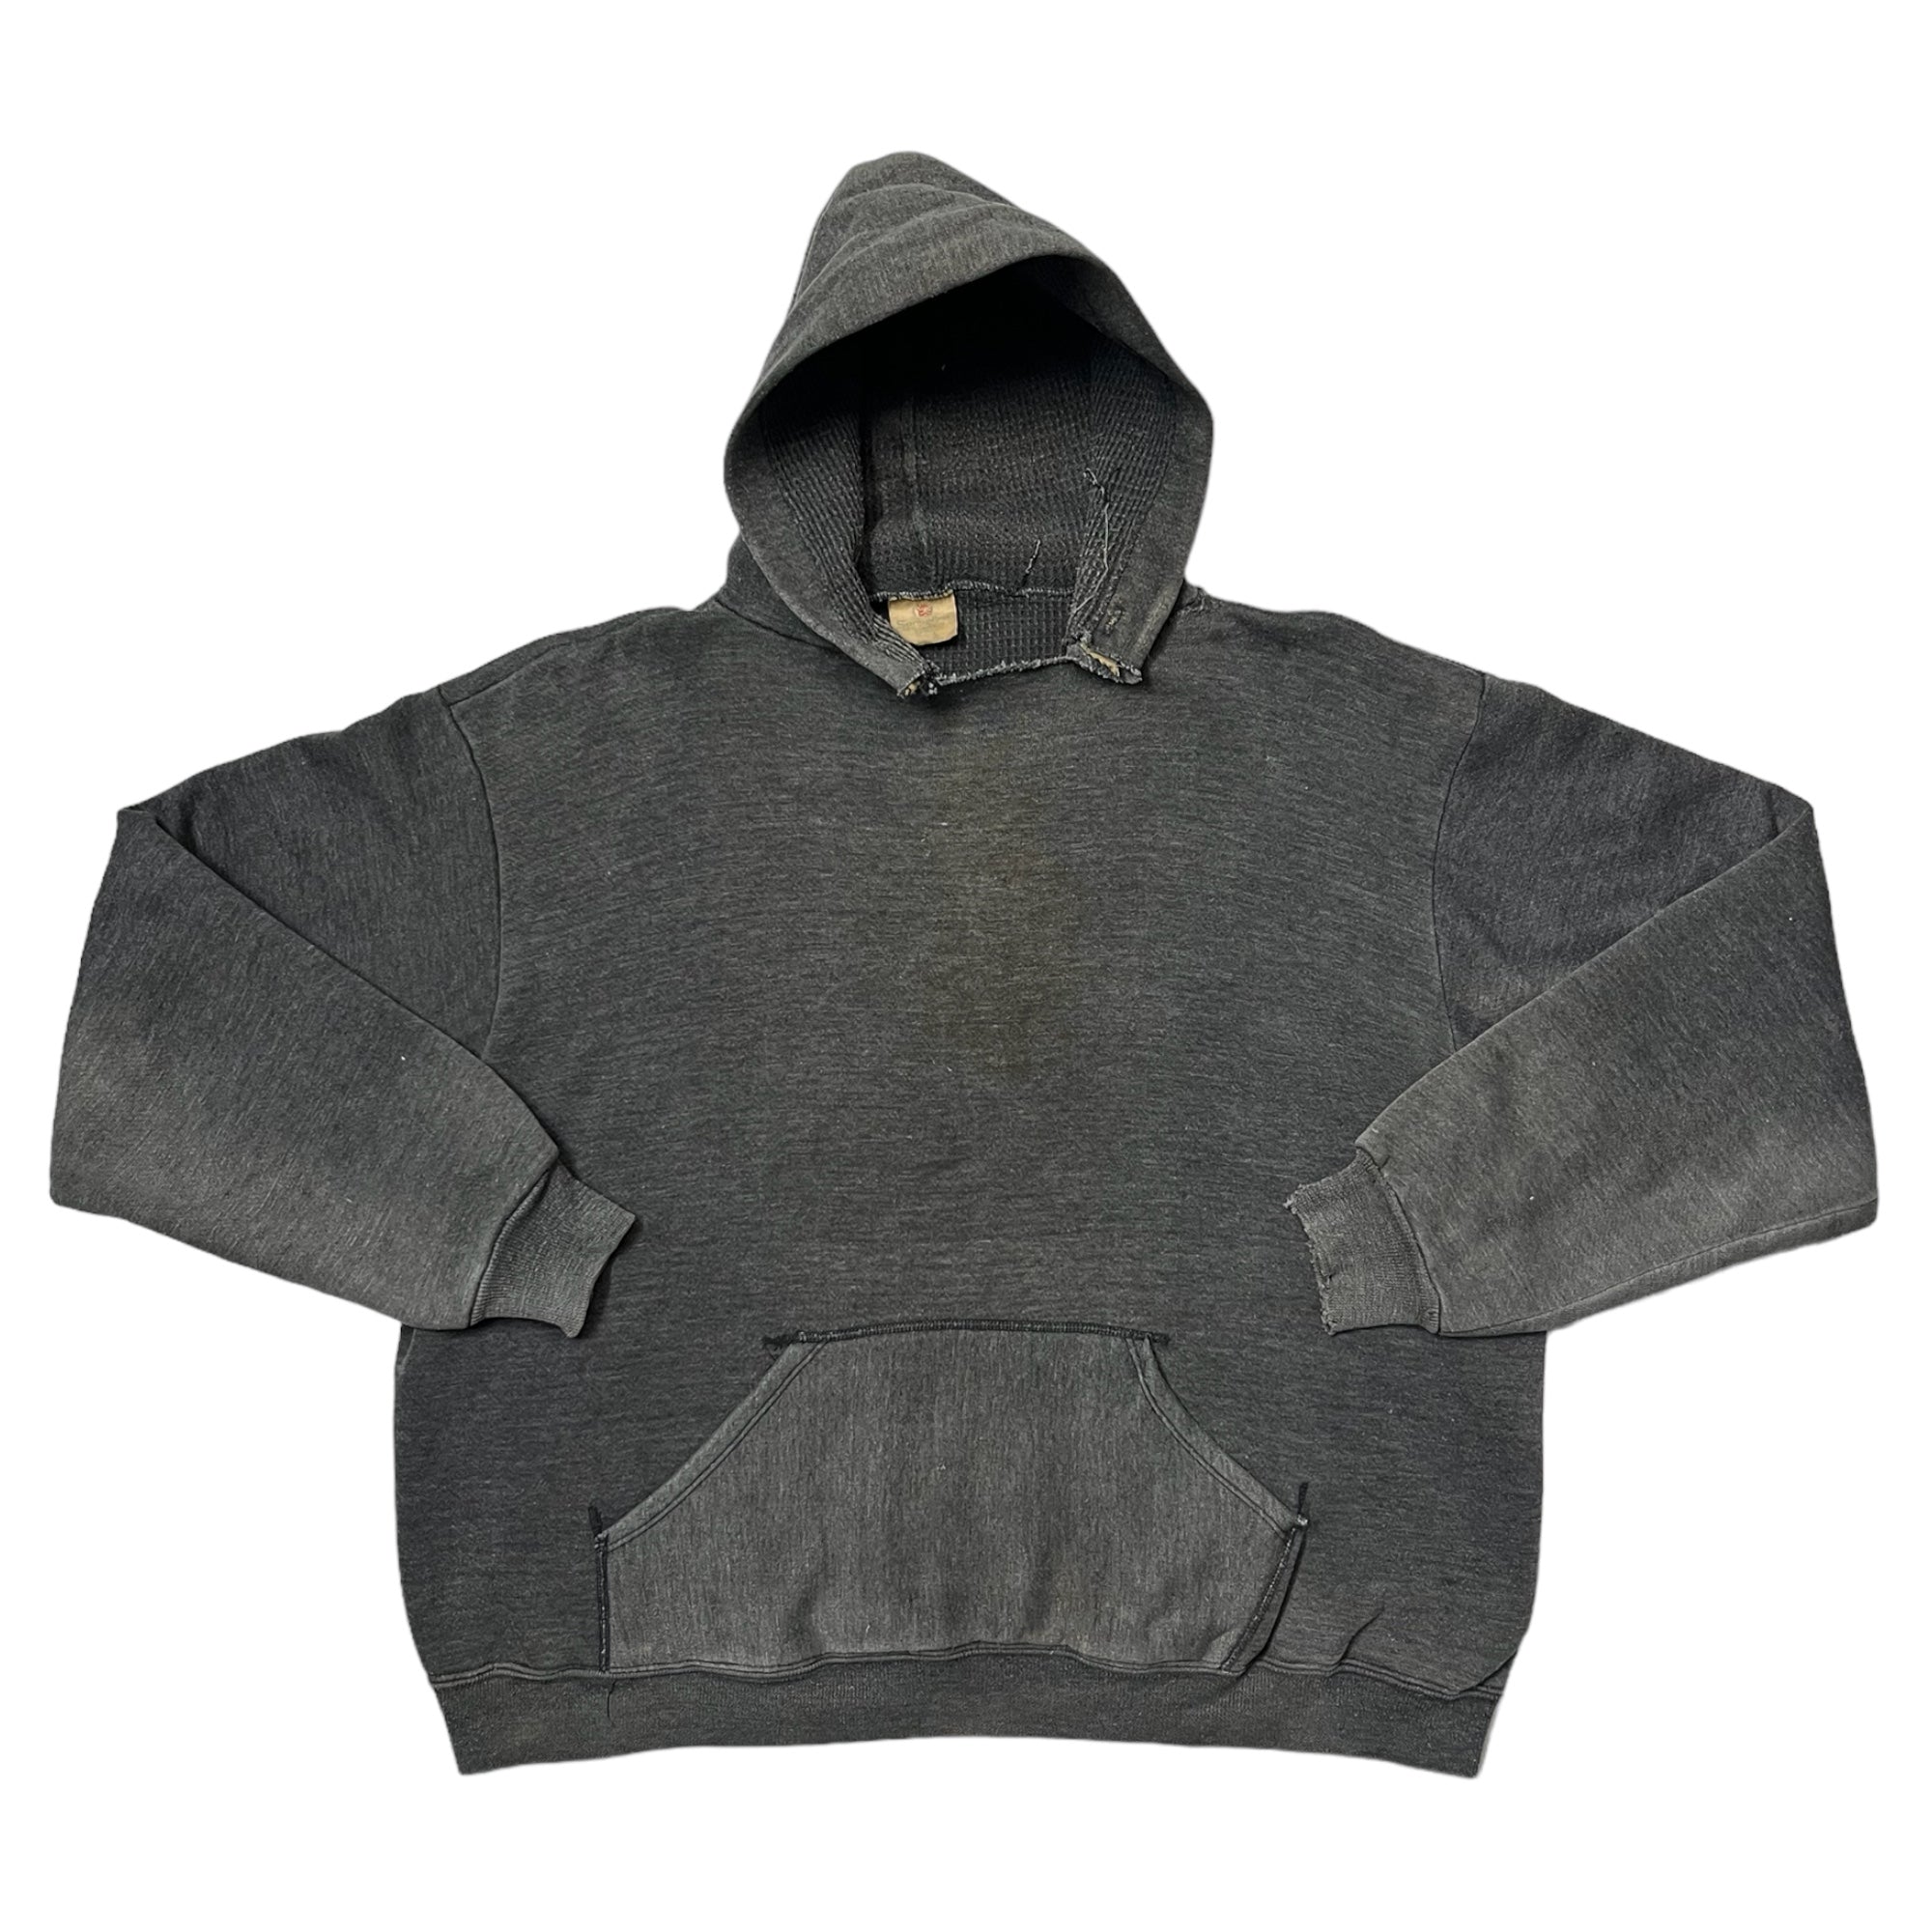 Early 1960s Waffle/Thermal Lined Springfoot Brand Hooded Sweatshirt - Faded Heather Black/Charcoal - M/L